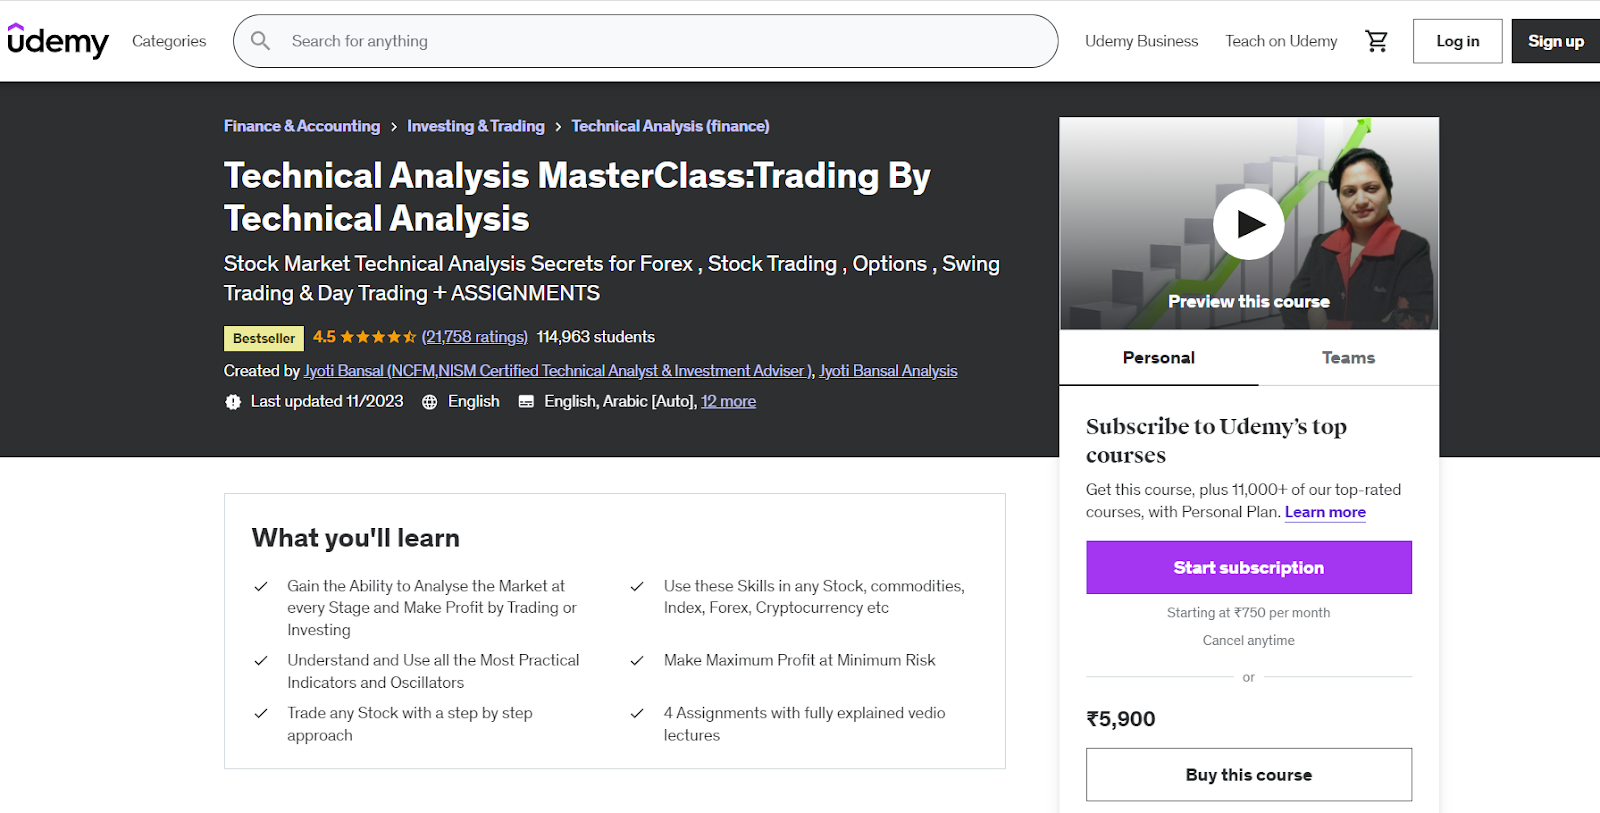 Technical Analysis Master class by Udemy 